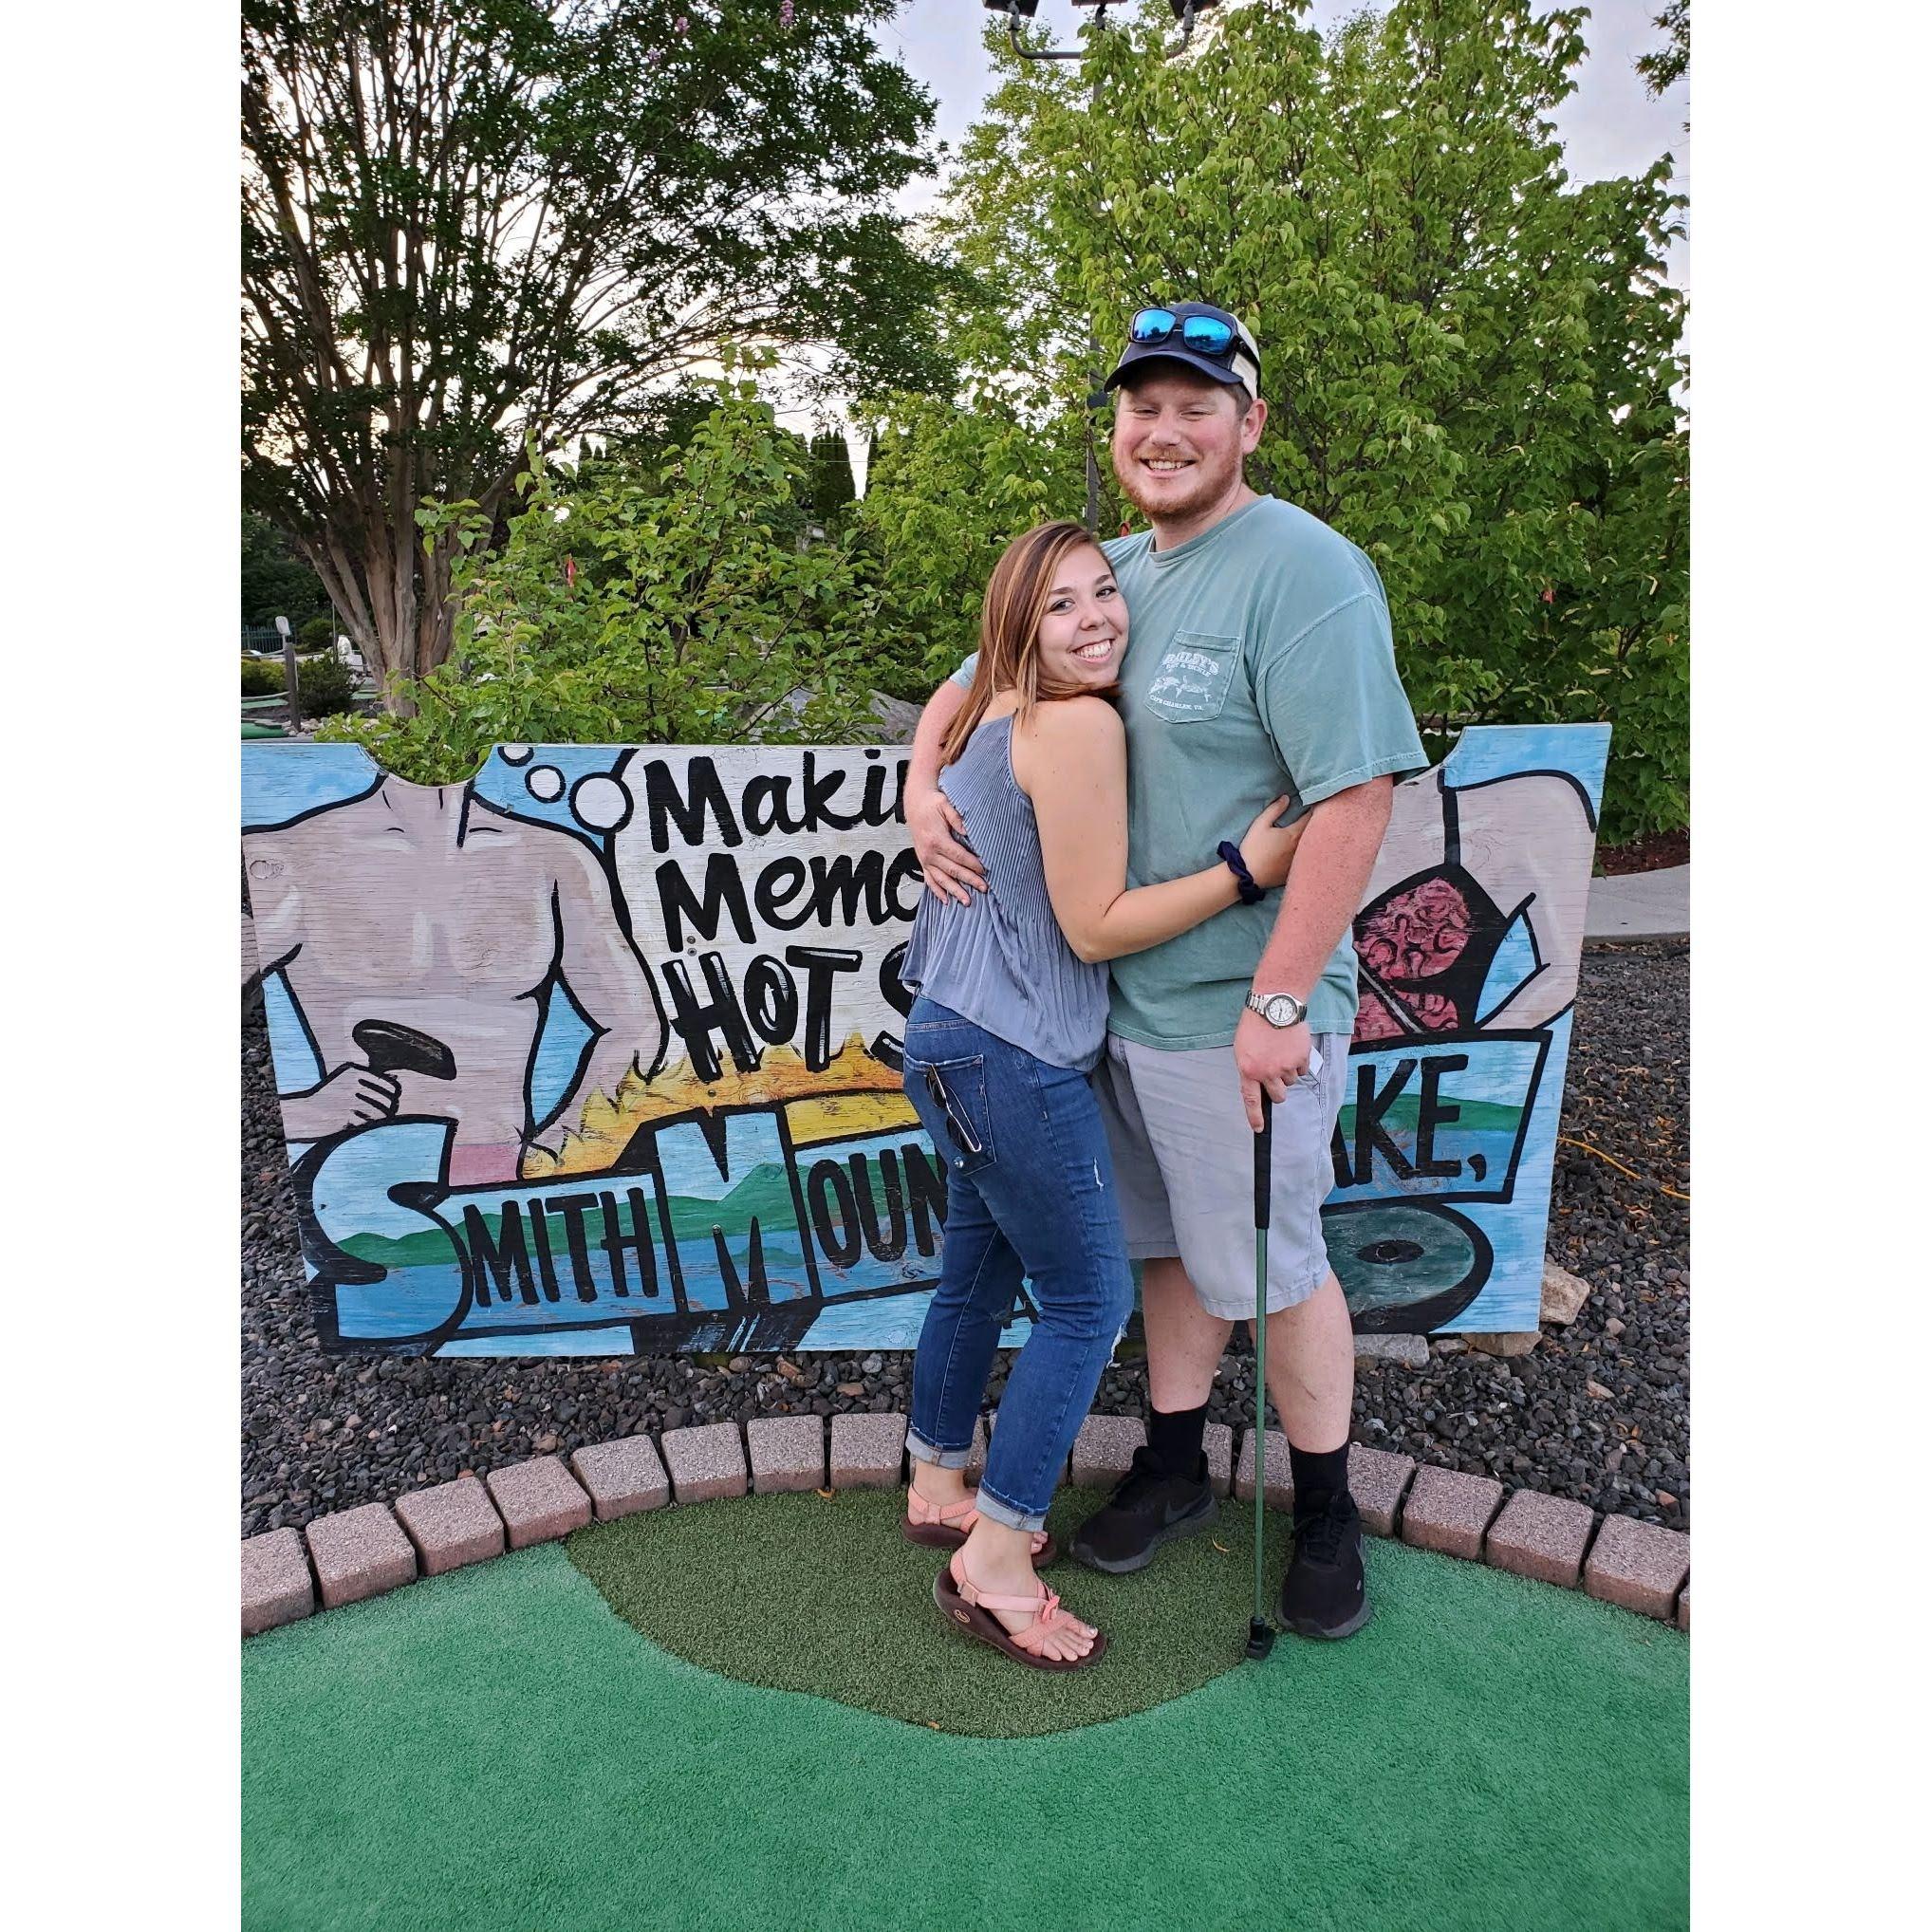 Our third date was Putt Putt and it is now our favorite date night!